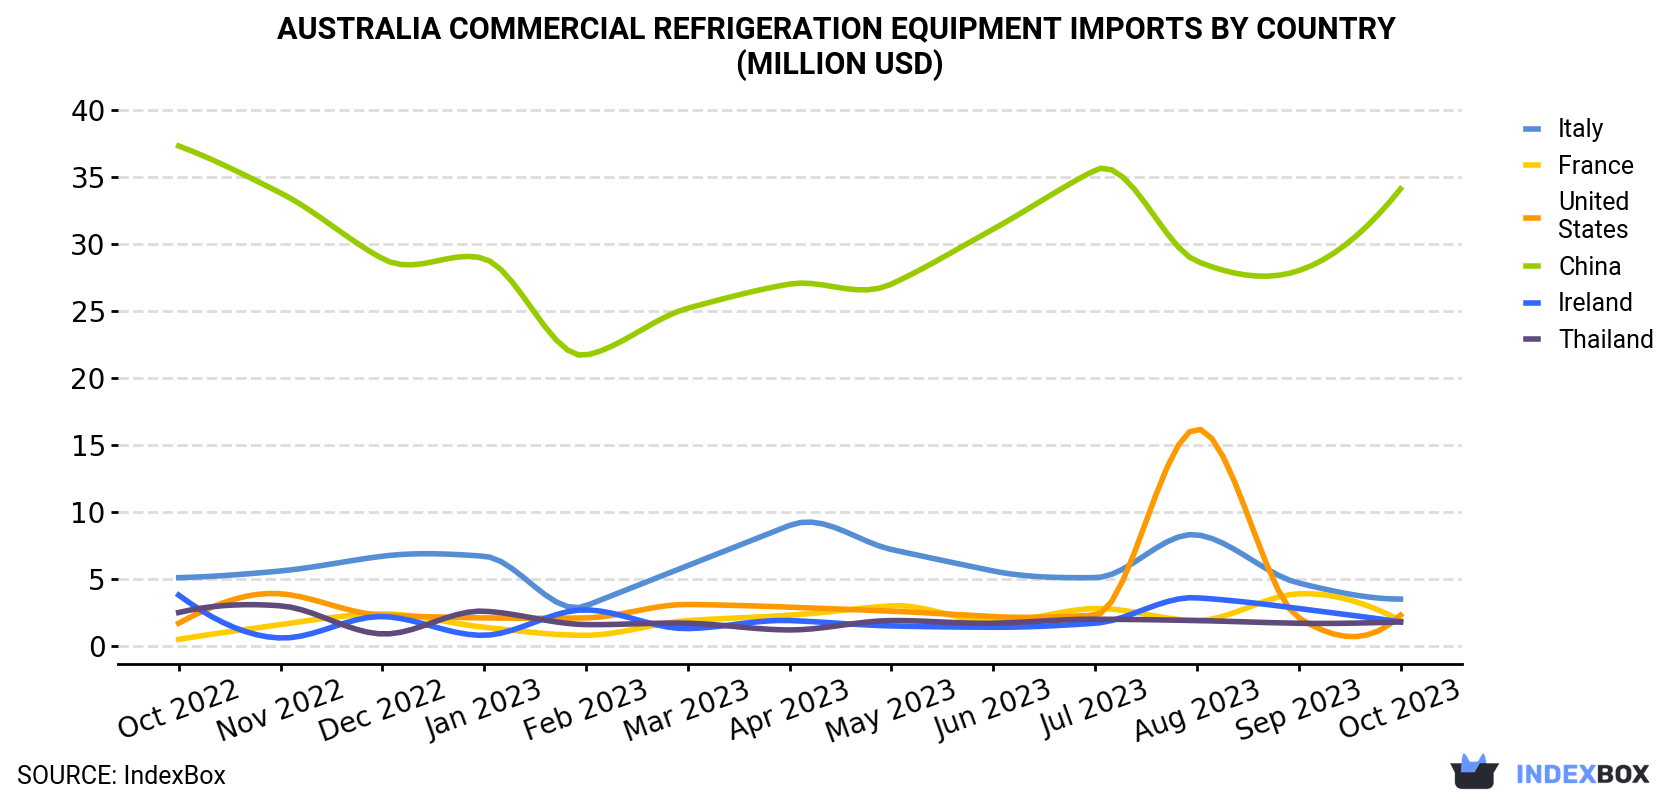 Australia Commercial Refrigeration Equipment Imports By Country (Million USD)